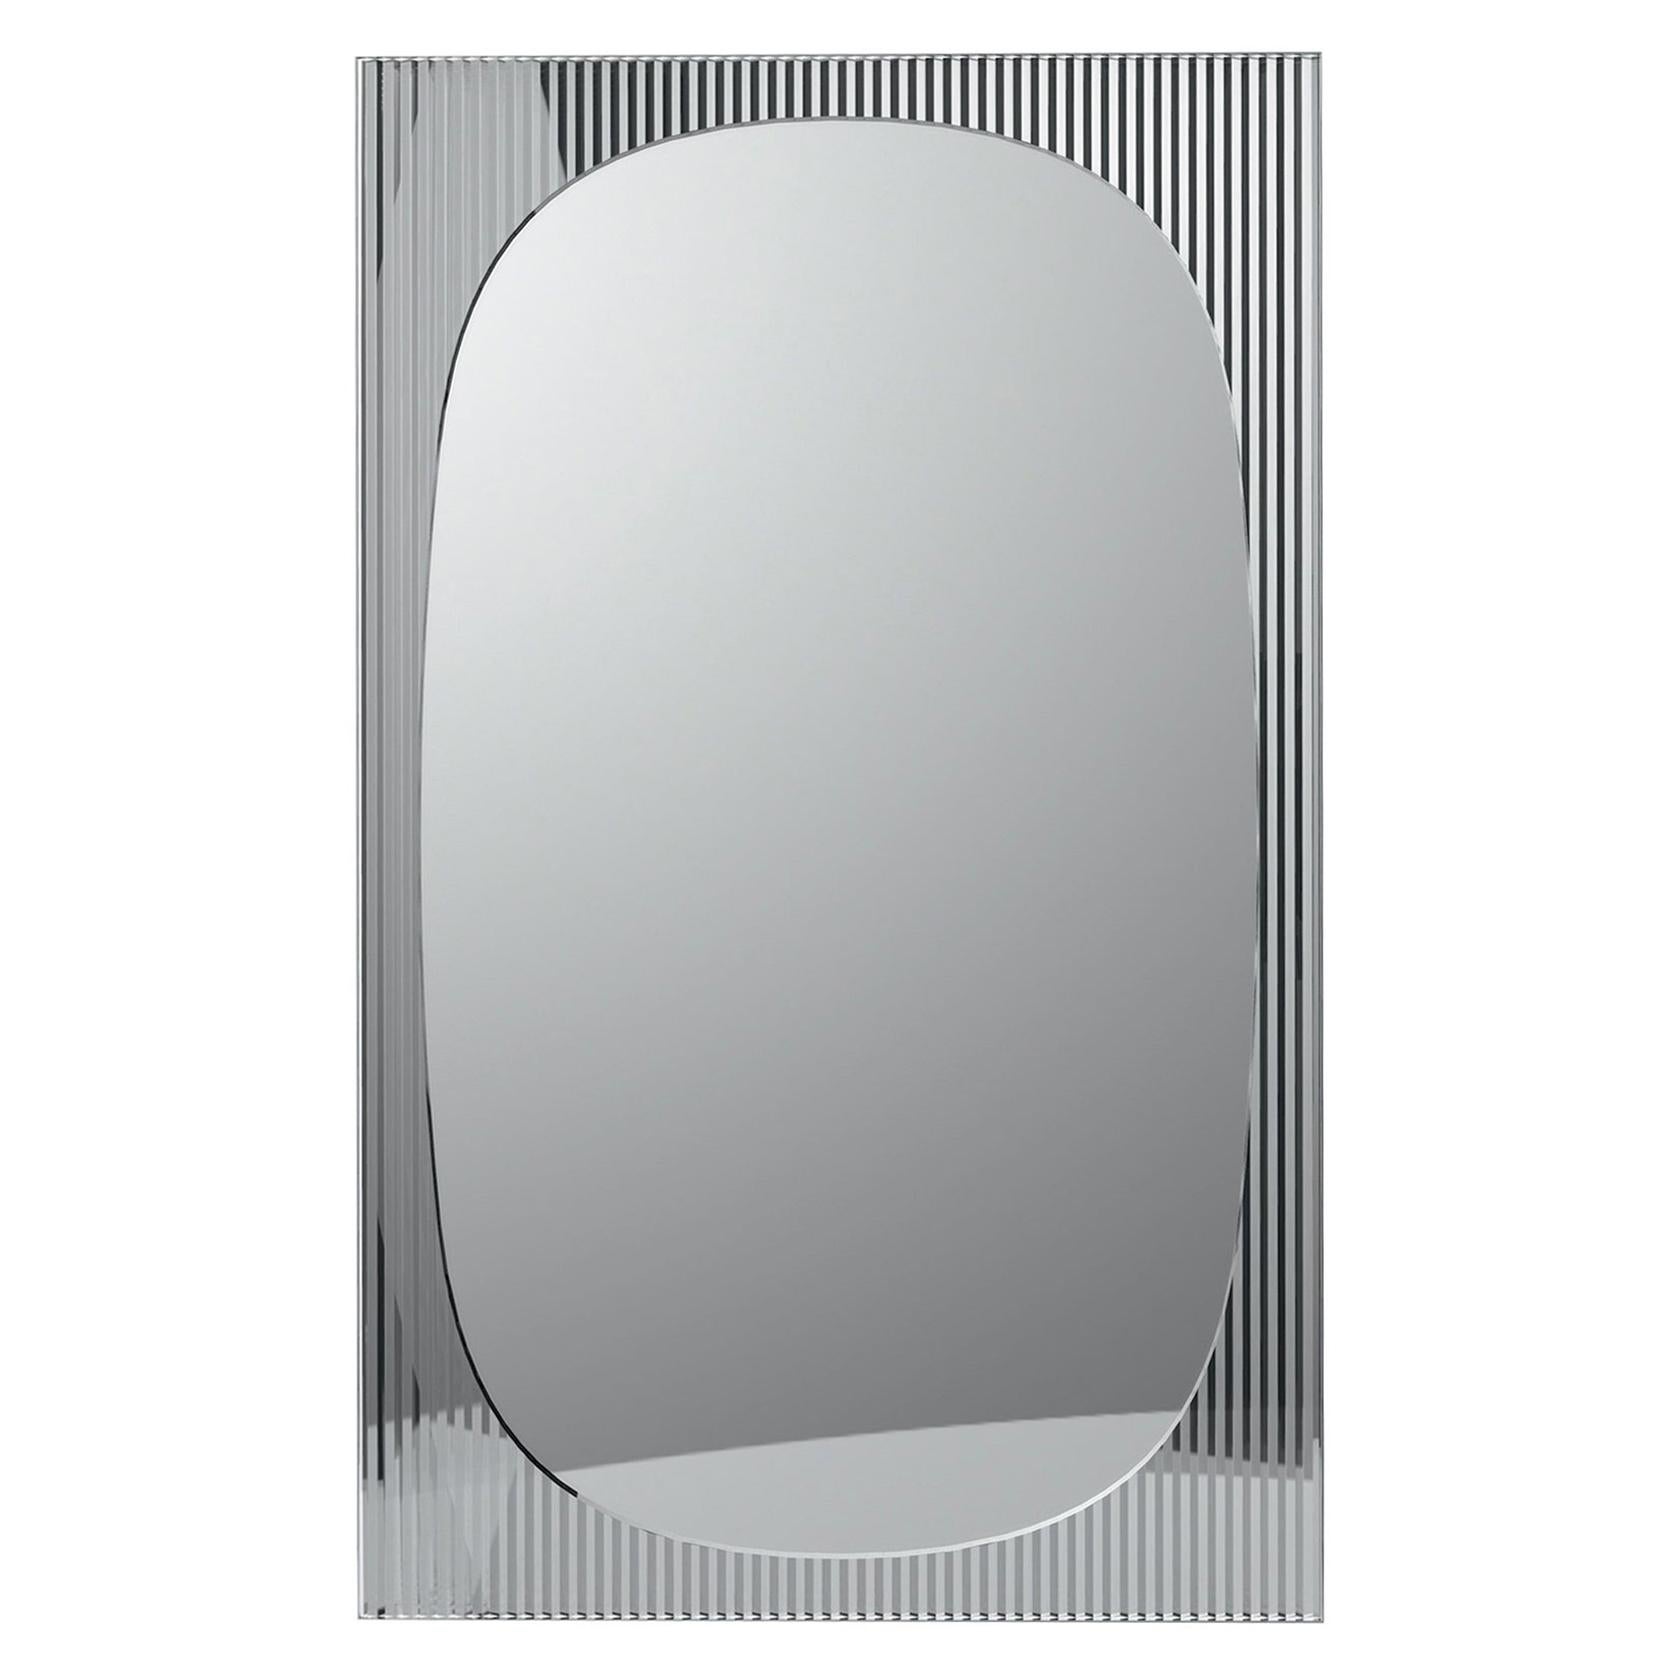 Lines on Rectangular Mirror For Sale